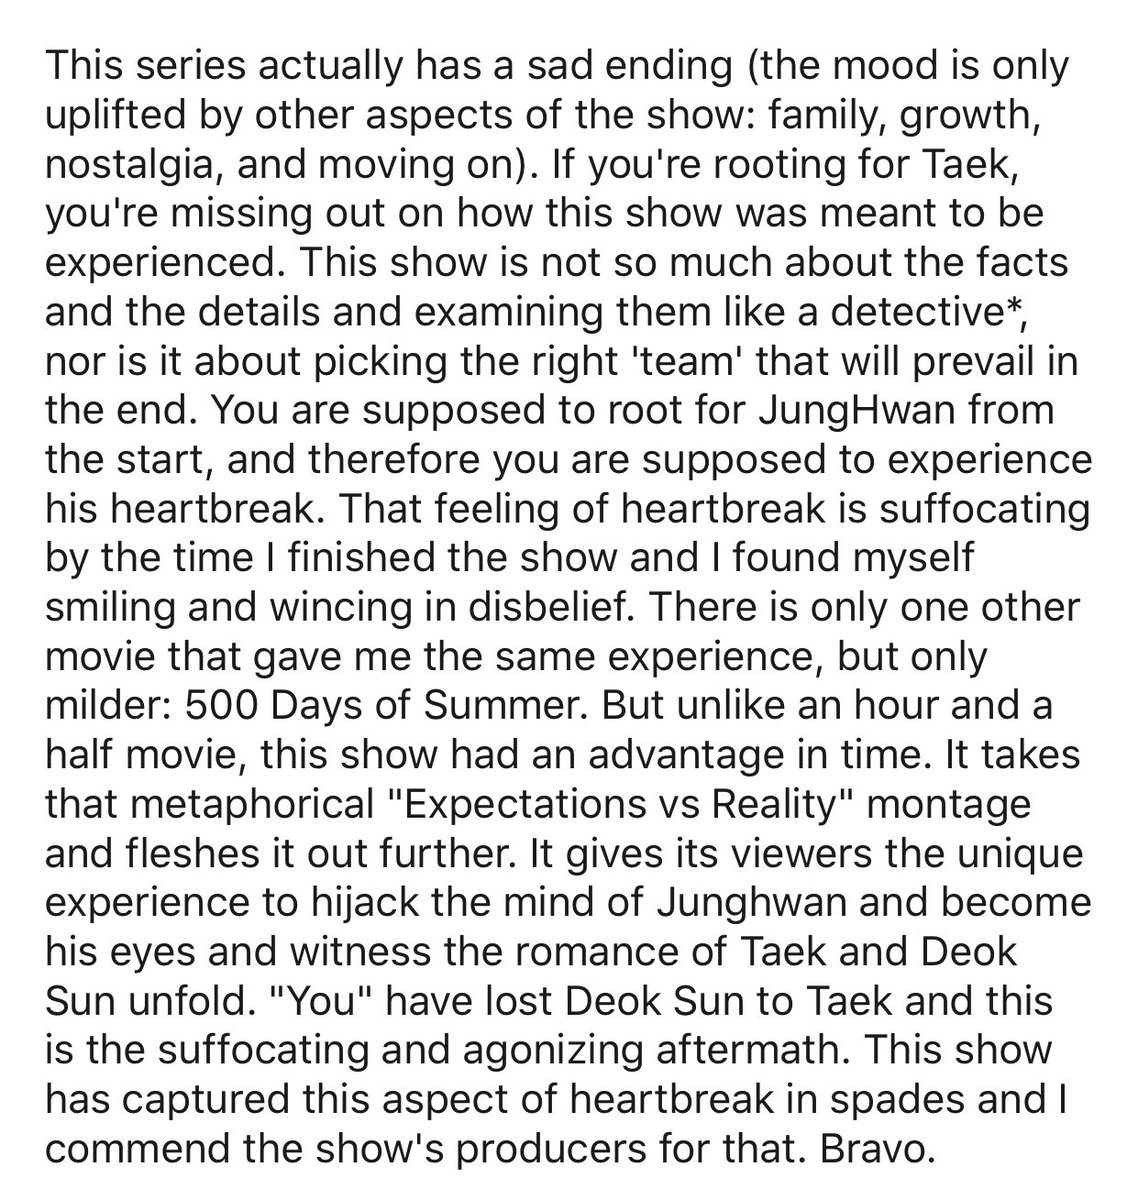 "you are supposed to root for junghwan from the start, and therefore you are supposed to experience his heartbreak." beautifully written  i don't think i'll ever love another kdrama as much as i love reply 1988